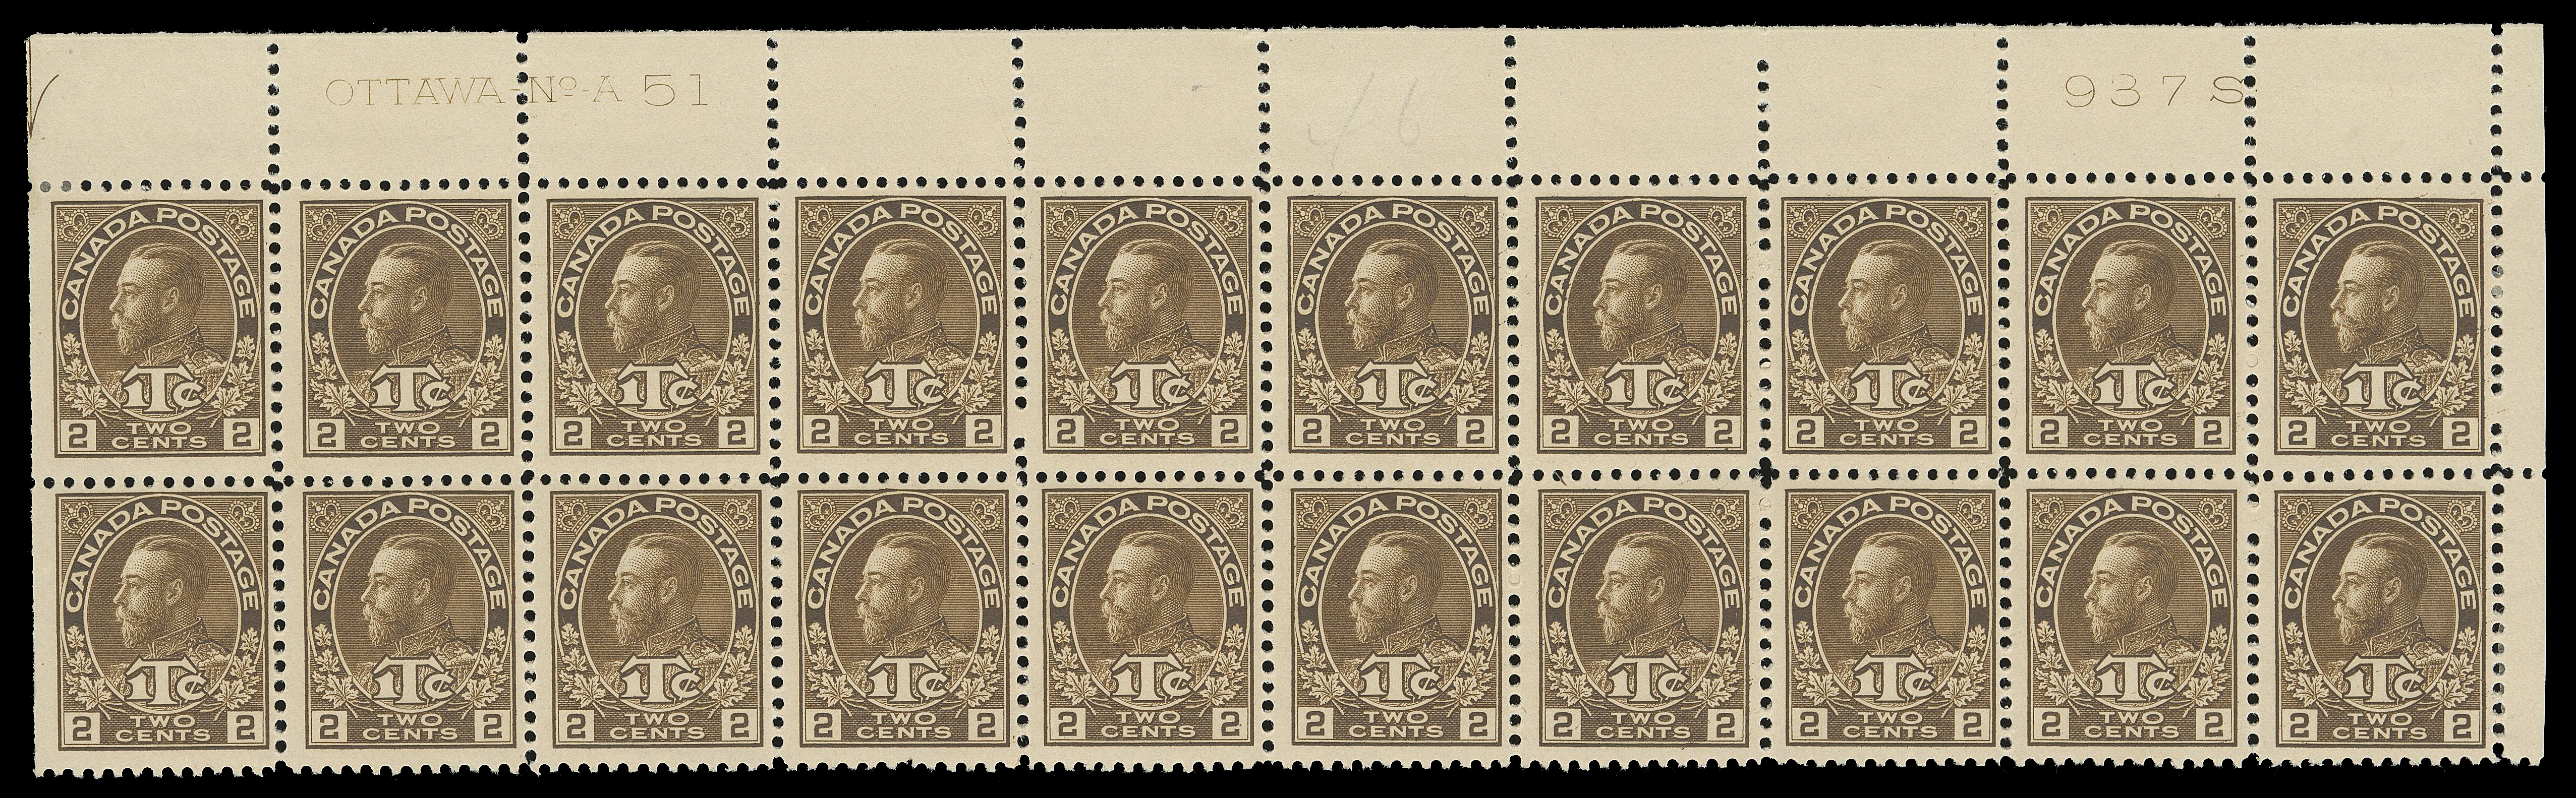 ADMIRAL STAMPS  MR4 shades,An attractive quartet of consecutive plate blocks of twenty in three distinctive shades of brown - UL Plate 49 in dark brown (small hinge thin on upper left stamp), UL Plate 50 in dark yellowish brown, UR Plates 51 & 52 in a rich brown shade; latter strip partly severed between first and second columns and hinge supported, well centered; all blocks hinged in end columns leaving fifteen or sixteen stamps NH, F-VF; an outstanding and very rare group, each being the only reported multiple of any size for their respective plate numbers per the Glen Lundeen census. (Unitrade cat. $5,660)